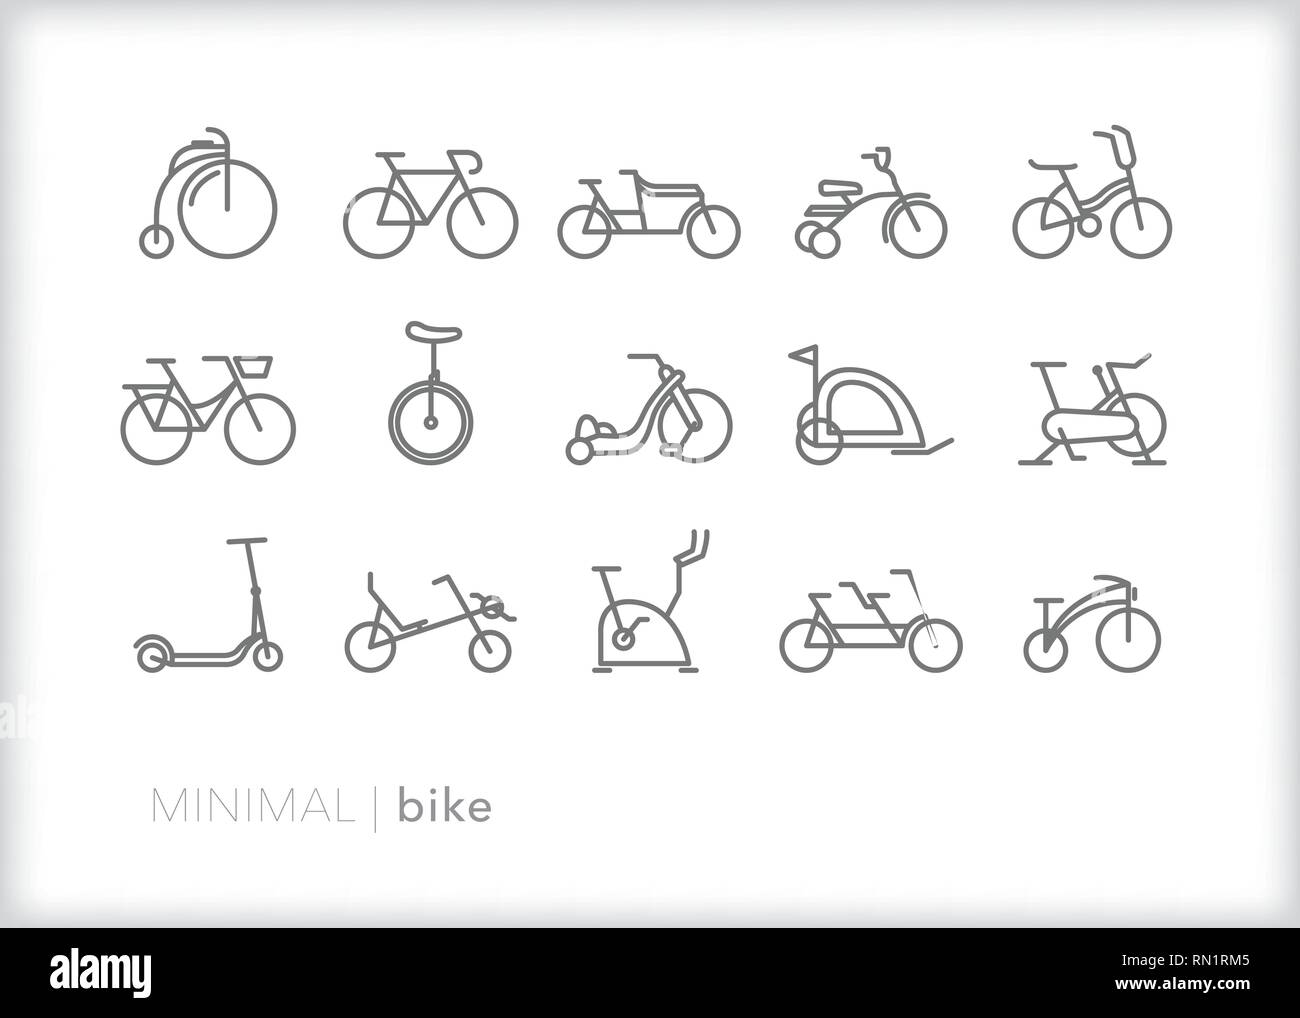 Set Of 15 Bike Line Icons Showing Various Types Of Bicycles Including Old Fashioned Cruiser Exercise Tandem Recumbent Tricycle And Unicycle Stock Vector Image Art Alamy Polish your personal project or design with these tandem bicycle transparent png images, make it even more personalized and more attractive. https www alamy com set of 15 bike line icons showing various types of bicycles including old fashioned cruiser exercise tandem recumbent tricycle and unicycle image236683109 html